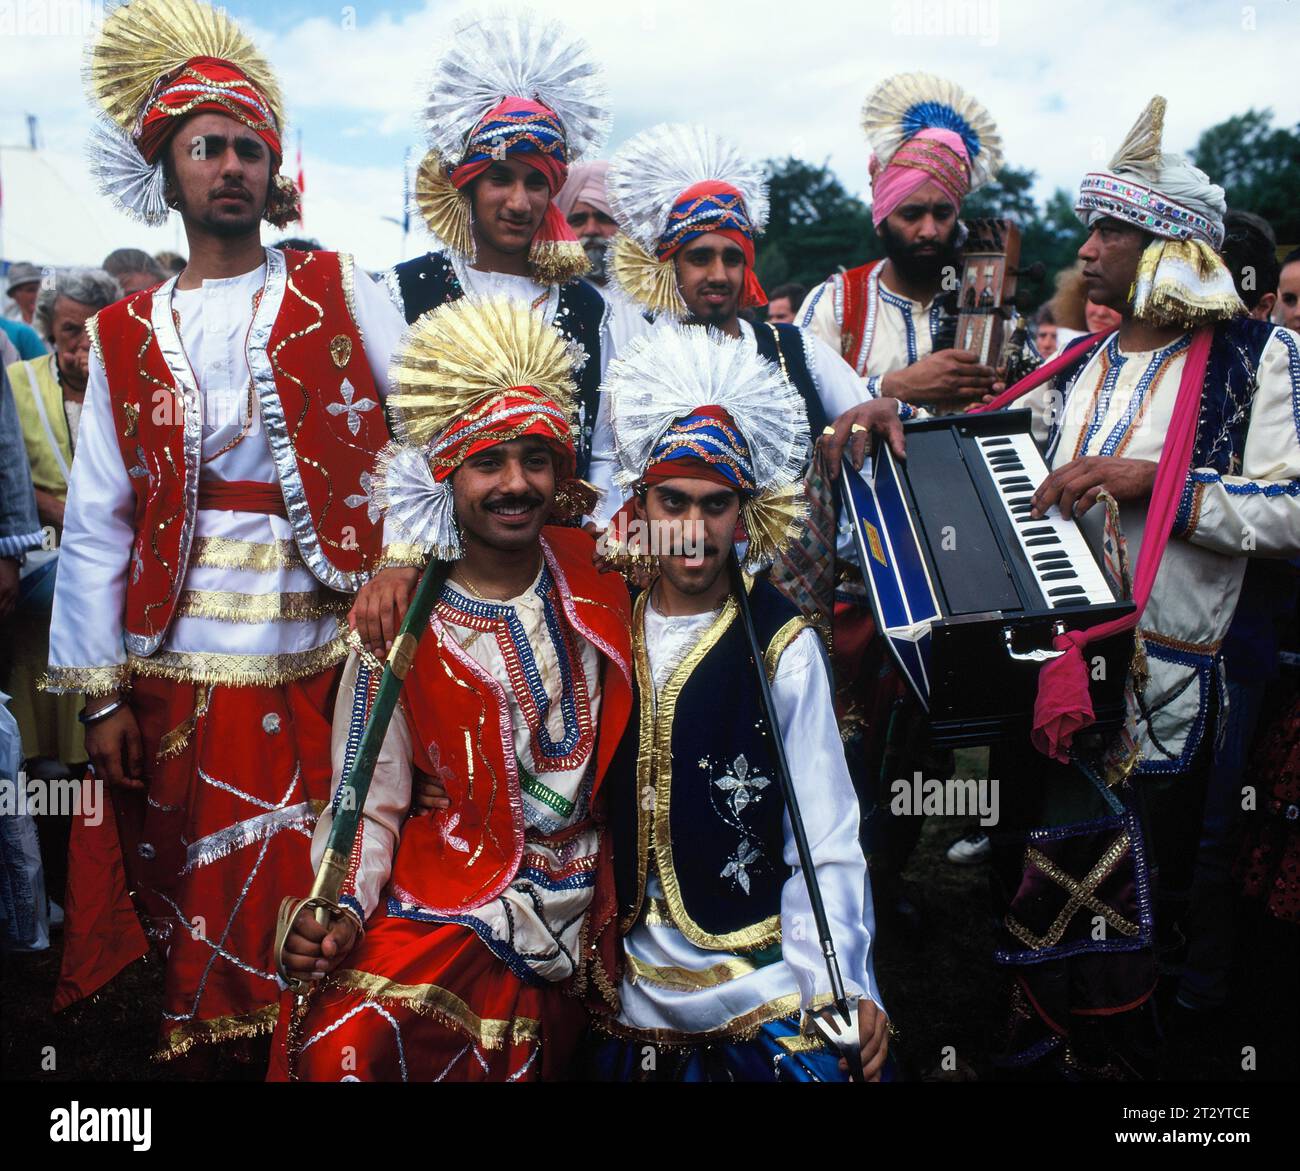 India. New Delhi. Carnival. outdoor portrait of male wedding band group in traditional costumes. Stock Photo